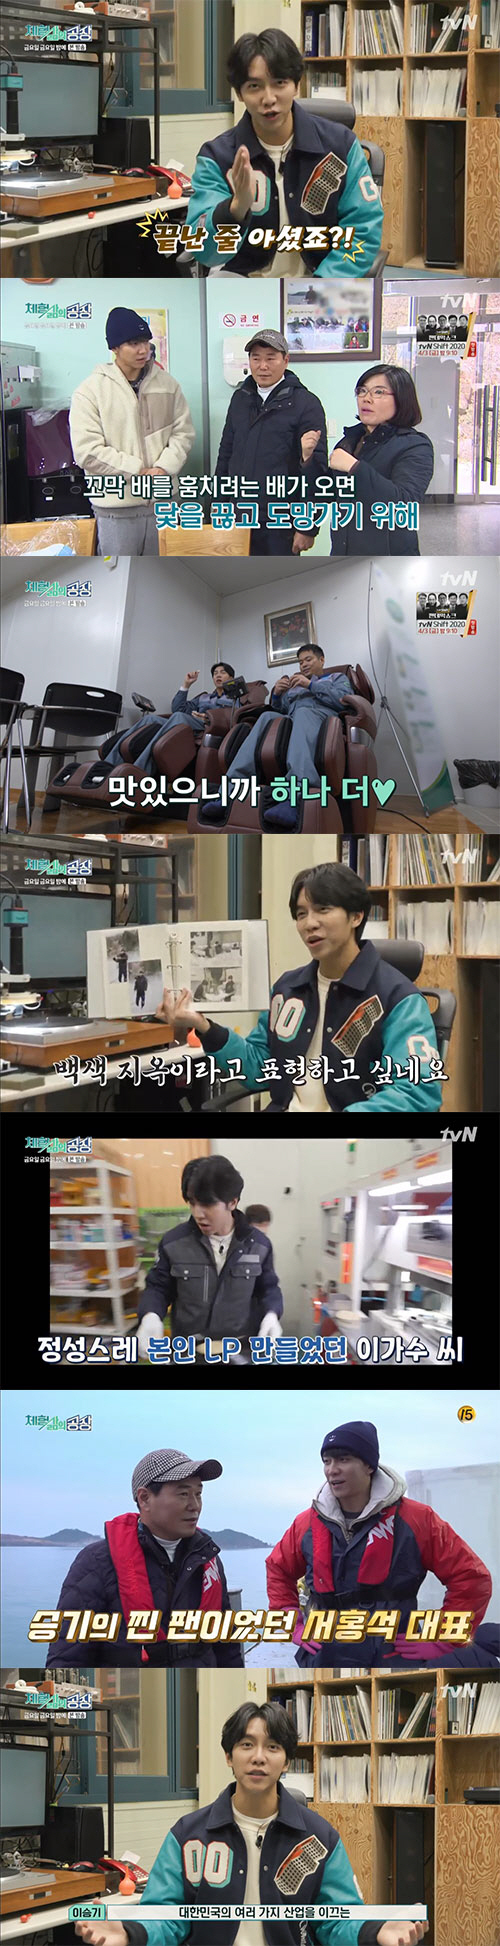 Friday night ended with A Pharase.On the 27th TVN Friday Friday night, there were a lot of scenes that had laughed at viewers, and the unseen broadcasts were released and left a deep lull.Lee Seung-gi, who has been to Factory of Experience Life 10 times on this day, said, We have returned as if there is a grace period.If you have to shoot a 19-gold movie related to the cockle in the first Factory, the cockle factory, Lee Seung-gi should wear only panties and go into the water, said PD.Lee Seung-gi said, I can not forget the praise I heard in the second Han and Factory. As for the third cheese factory, I can not forget Mr. Lawrence.I did not see it, but I remember a lot. In the cheese factory, Lee Seung-gi enjoyed a massage chair with his senior and said, I should not eat cheese secretly.As for the laundry factory, It was a white hell.I thought I was too horny or junior to edit, he said, and Lee Seung-gi and my juniors who were horned in the laundry factory were released and attracted Eye-catching.Lee Seung-gi, for the glove Factory, said: It was inception; then I still couldnt find the top, attracting Eye-catching.Lee Seung-gi, who received a house of his pet dog in the house factory, laughed, saying, Pepero is afraid to go there.Lee Seung-gi cited Juk-yat as the best master: Dr. Juk-yat was like a real master; and as the best fellow, he is the head of the calves.He treated me with love, she said.Finally, Lee Seung-gi said, I have finished the factory in the tenth series. It seems that my reliability has risen because my seniors and craftsmen are running on the front line.Thank you, he said.Next, in My Friends Recipe, which is very special and secretive, Jin-kyeong Hong said, I will release the unbroadcast part that I could not disclose because it was broadcast 15 minutes.My Friends Recipe was taken by the production crew in advance, and the mothers laughed at the appearance of the unsettled.In particular, Kim Young-chuls mother laughed at her daughters tit-for-tat.In addition, the mother of the comedian Yoon Sung-ho laughed when she showed a bibimbap in her mouth unlike the intention of the production team, and the production team praised her mother who was good at talking, saying, I can go to the food program.Nam Hee-Seoks father boasted a tremendous cut, saying, It makes the Chinese restaurant go old and it makes me sick. He also showed a secret soy sauce secretly to the production team and attracted Eye-catching.In addition, Nam Hee-Seoks mother and father laughed with a disagreement by putting a beat.Jessies mother said, I like the Factory of Experience Life better. She laughed at the viewers by saying, If you need licorice next to Jin-kyeong Hong, please call me if you need it.Lee Seo-jin at Lee Seo-jins New York City New York City revealed jet lag adaptation and memories at amusement parks.Lee Seo-jin released a huge amount of knowledge related to the film, especially Lee Seo-jin, who said, I met Johnny Depp at the New York City Department Store.I couldnt take pictures because I didnt have Camera at the time. So I saw what Johnny Depp was buying and he bought a luxury suit.I came to Nicholas Cages birthday party wearing it. Lee Seo-jin also memorized the birthdays of Hollywood Actors, and Tam Cruise boasted of his knowledge of seven octaves.Lee Seo-jin ate memories from New York City to Chinatown, and was shown eating pizza house spaghetti for unreleased broadcasts.Especially, meatball spaghetti meatball was the size of a billiard ball, and it laughed.Lee Seo-jin and Na Young-Seok PD made a meal bet at the dim sum house, and eventually Lee Seo-jins victory revealed Na Young-Seok PDs calculation.Tukha Na Young-Seok PD said, Do you not see Times Square or musicals? And then he was angry with Lee Seo-jin, and eventually the two headed for the Times Square in New York City.Lee Seo-jin laughed, saying, Ive never been here before.Lee Seo-jin said: Twenty-five years ago, our home appliances started coming in, the cheapest.Our products are raising their status, and I seem to be declining. Lee Seo-jin and Na Young-Seok PD headed from Manhattan to New Jerseys jjimjilbang, and the knight said, Its not Sam OHermie, and Lee Seo-jin said, Its famous.Oh said he wanted to be president. The knight said, Maybe if you come out, you will be elected. Even the knight caught Eye-catching by revealing that he had a relationship with Sam OHerrie since he was a child.Finally, Professor Yang Jung-moo of The Wonderful Art Country and Professor Kim Sang-wook of The Wonderful Science Country had a special fun.On this day, I had time to solve the curiosity of viewers.Viewers can define art and science as love, It is hot as you go up to the sky, How to memorize science easily, Do you need to memorize the jugging rate chart, Explain quantum mechanics so that Eun supports can understand, Why is giraffe tongue blue,  the most prized piece of work you have.Do you feel like a work? and other absurd questions were poured out.Professor Kim Sang-wook and Professor Yang Jung-moo explained that everyone could understand easily, but he laughed when he asked, Please explain the quantum mechanics so that Eun-support can understand it.In addition, You are a cheering party, the players who have appeared in the meantime have appeared and it was nice to see.On the other hand, Friday Friday Night is a program consisting of short-form corners of different materials such as labor, cooking, science, art, and travel in omnibus format.Corners of different topics of about 15 minutes were unfolded with speed and gave fresh fun.In addition, it has been well received that it has Jessie the new possibilities of the recent entertainment program where short form contents are mainstream.